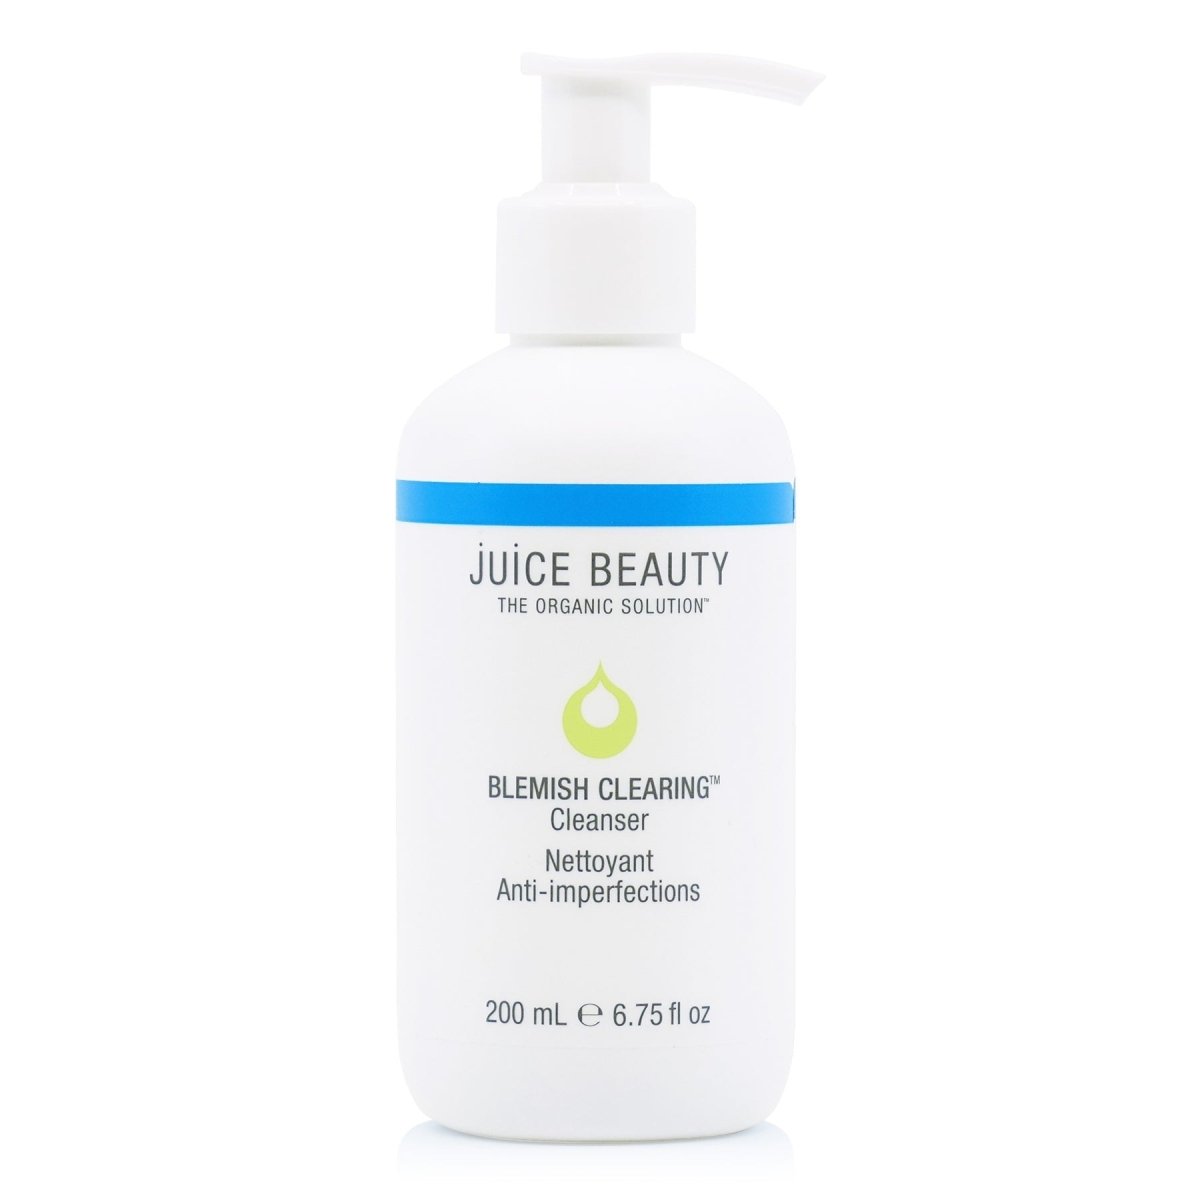 JUICE BEAUTY BLEMISH CLEARING Cleanser - SkincareEssentials